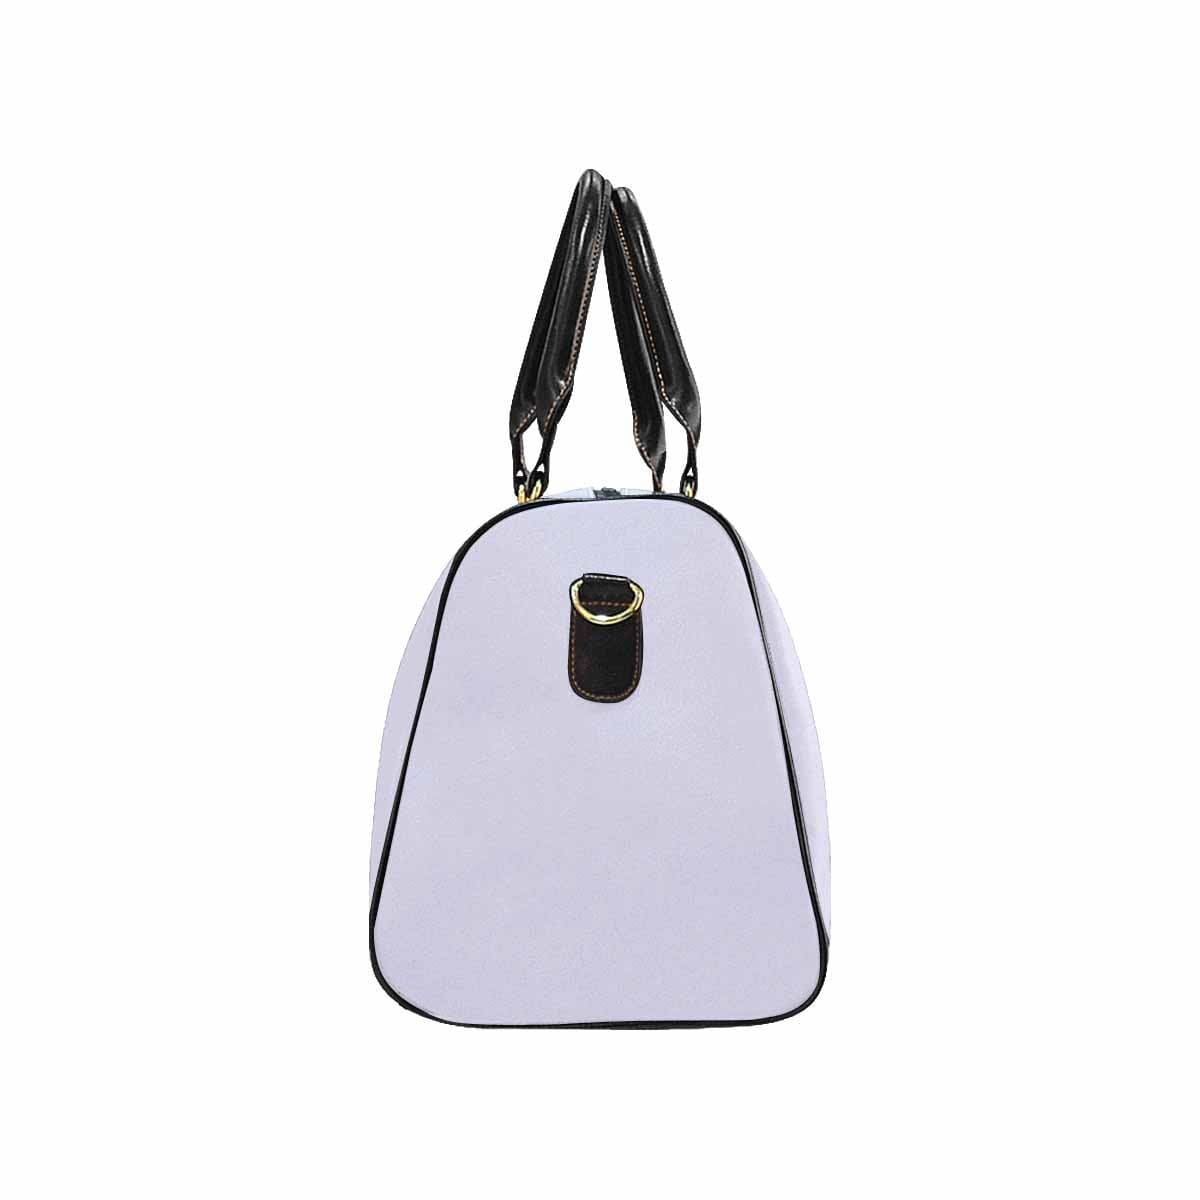 Travel Bag Leather Carry On Large Luggage Bag Lavender Purple - Bags | Travel